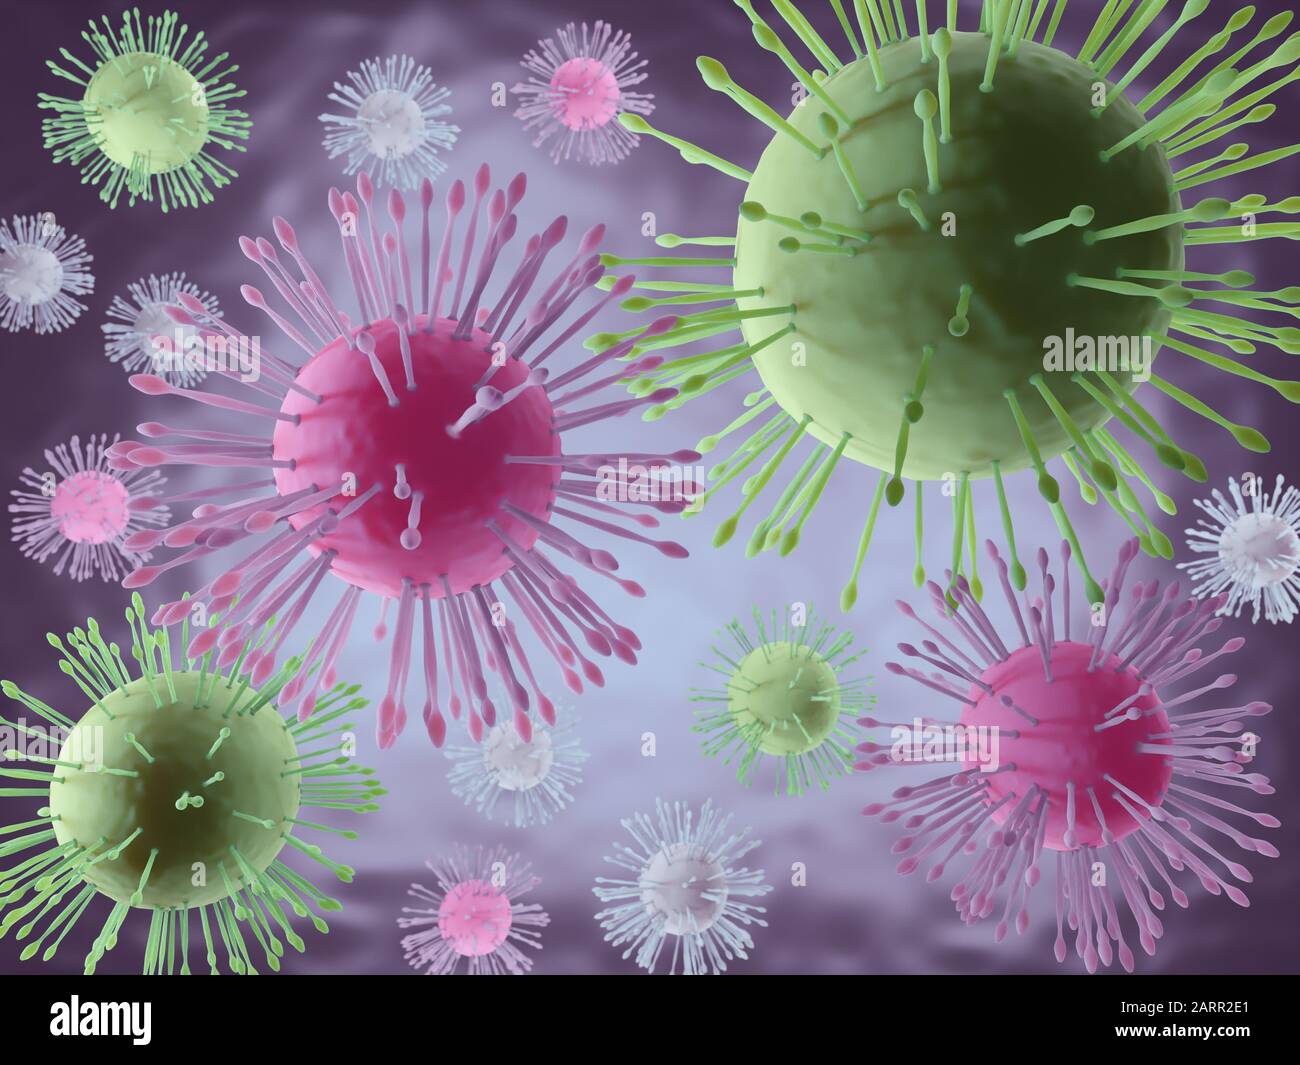 3D rendering of microscopic image of deadly coronavirus particles Stock Photo